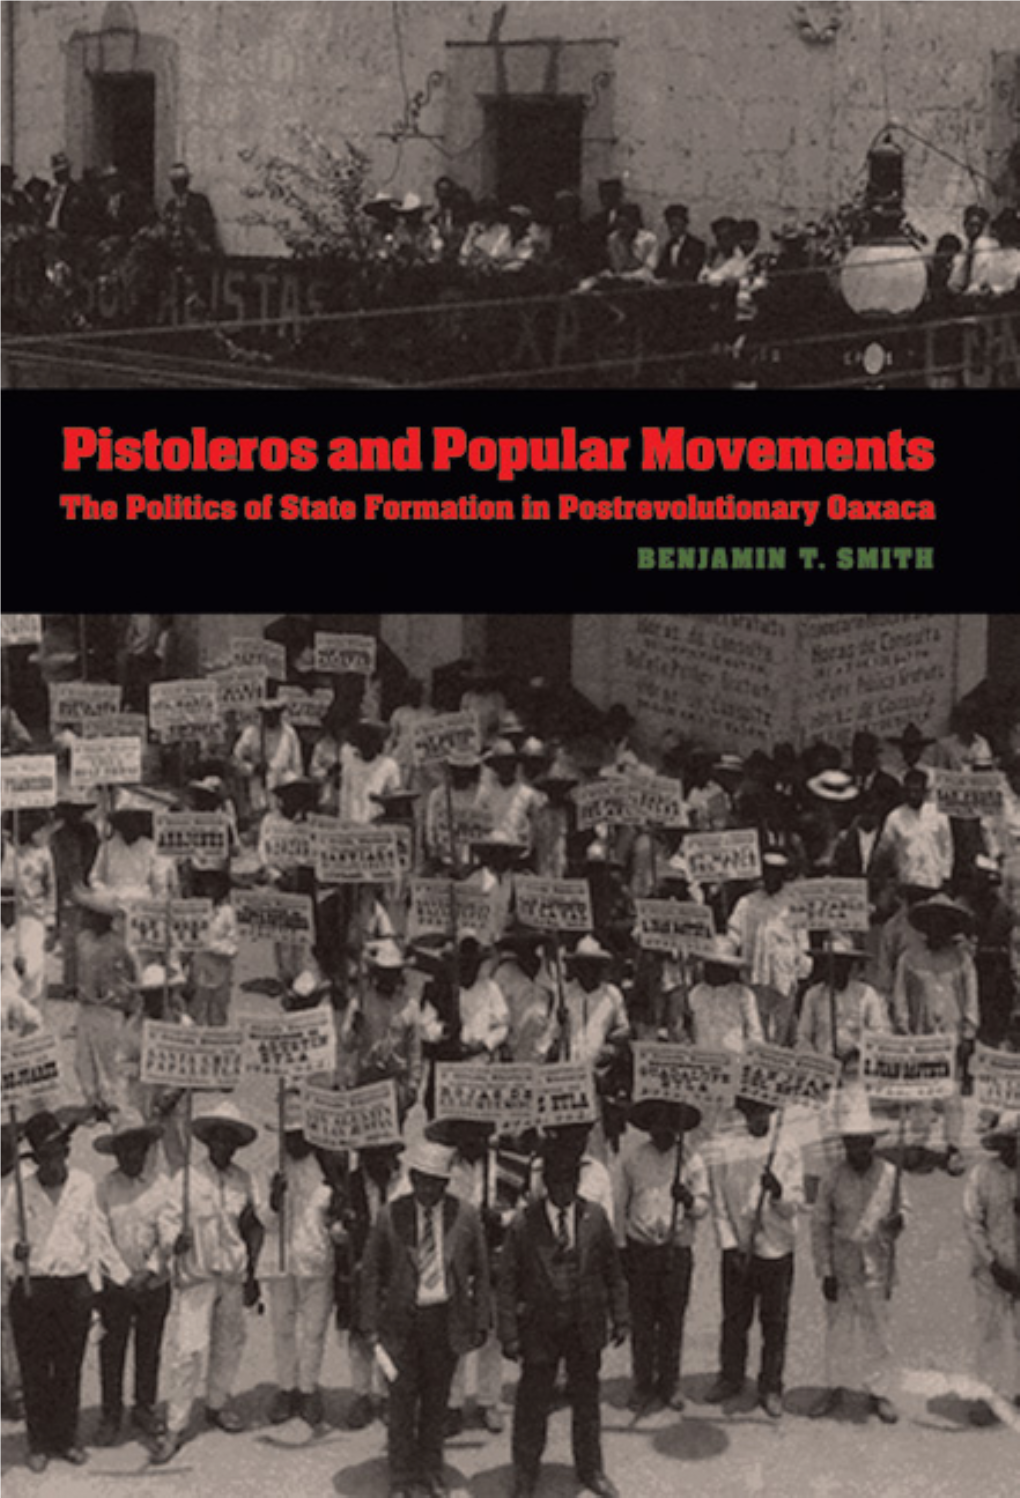 The Politics of State Formation in Postrevolutionary Oaxaca